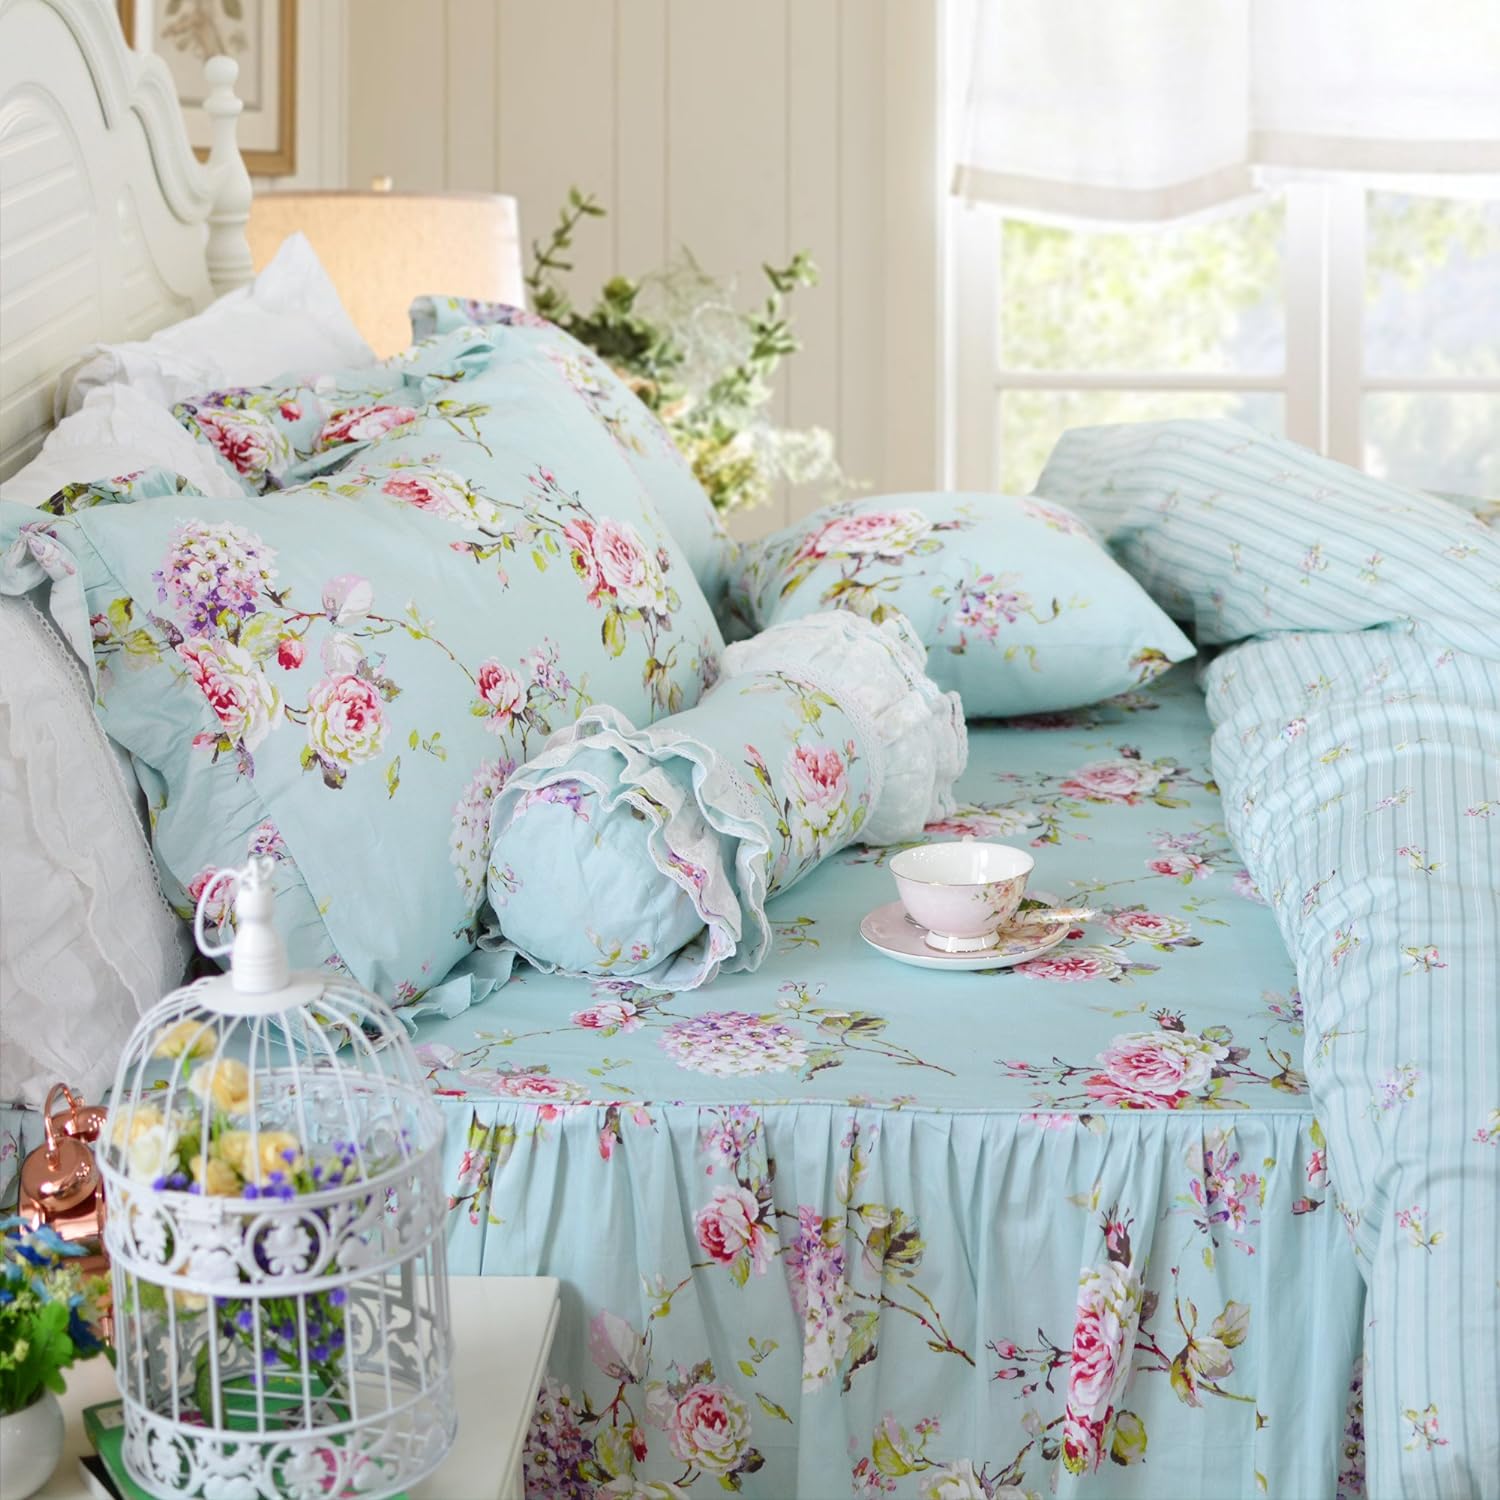 FADFAY Shabby Floarl Cotton Bedding Set Twin 4-Pieces Light Blue Hydrangea Print Duvet Cover Set with Bedskirt French Country Style with Ruffle 1 Duvet Cover1 Bedskirt2 Pillowshams